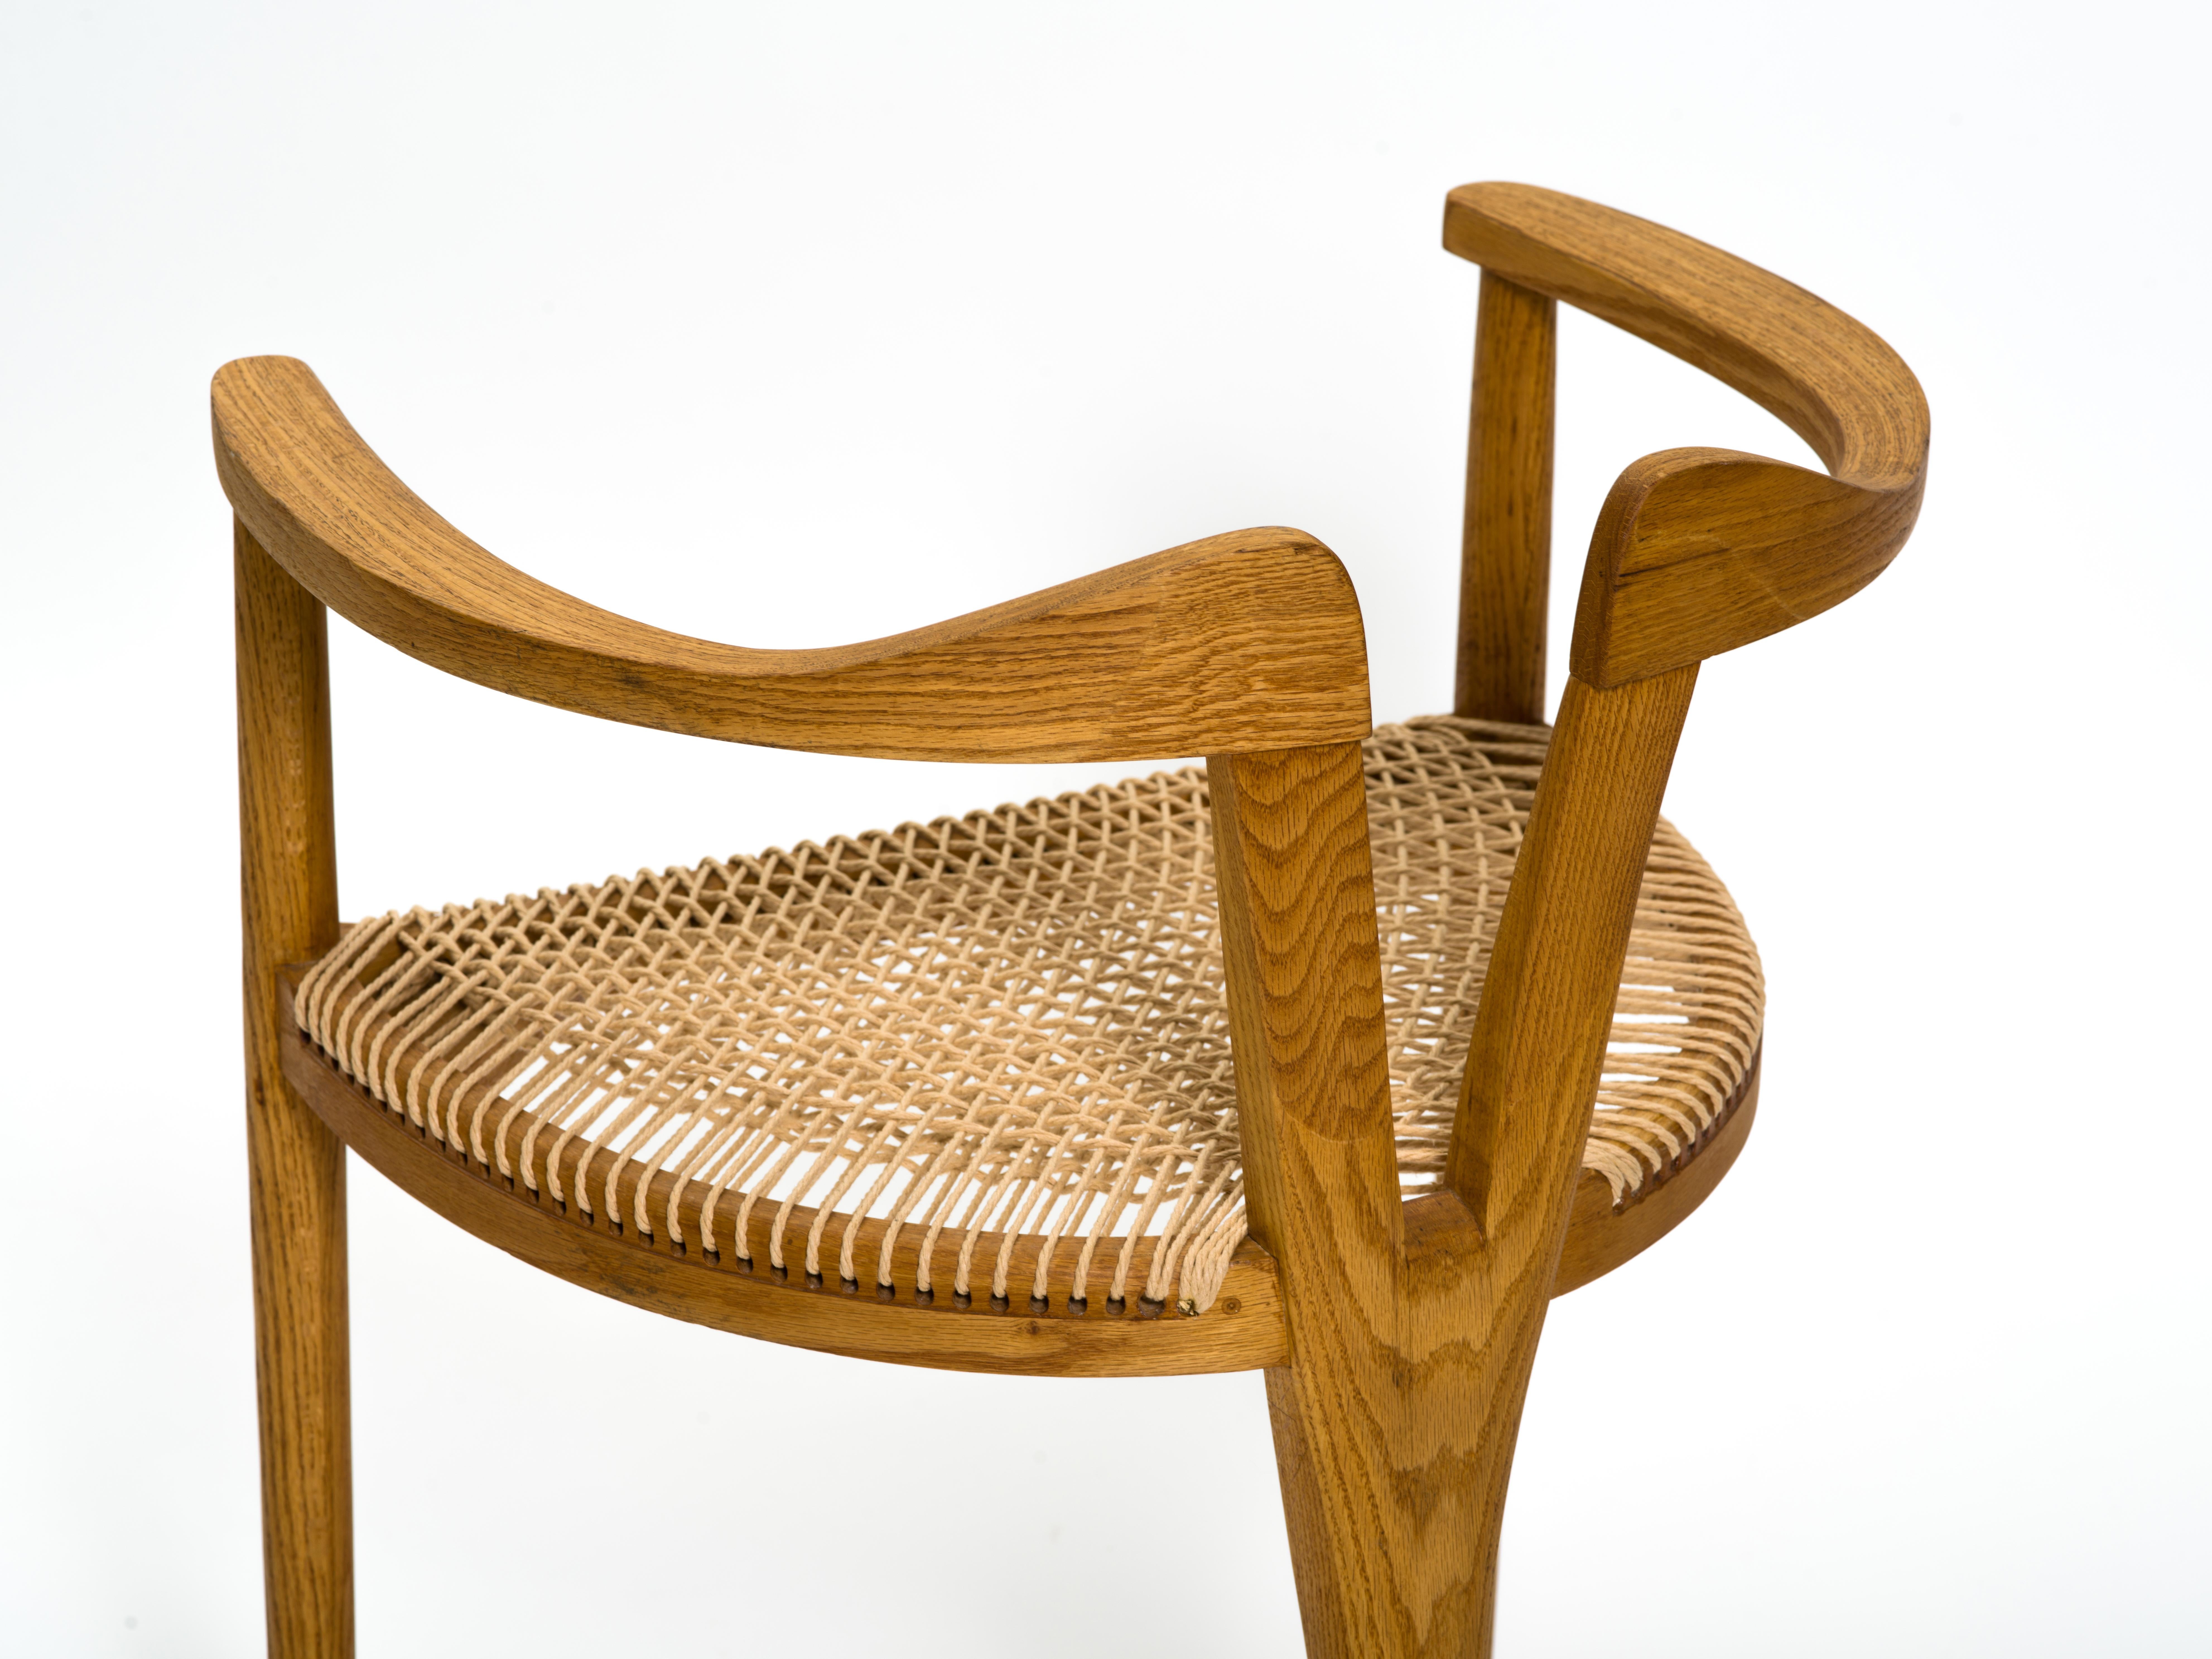 American Studio Craft Tri-Leg Chair in Oak with Woven Seat after Hans Wegner 3